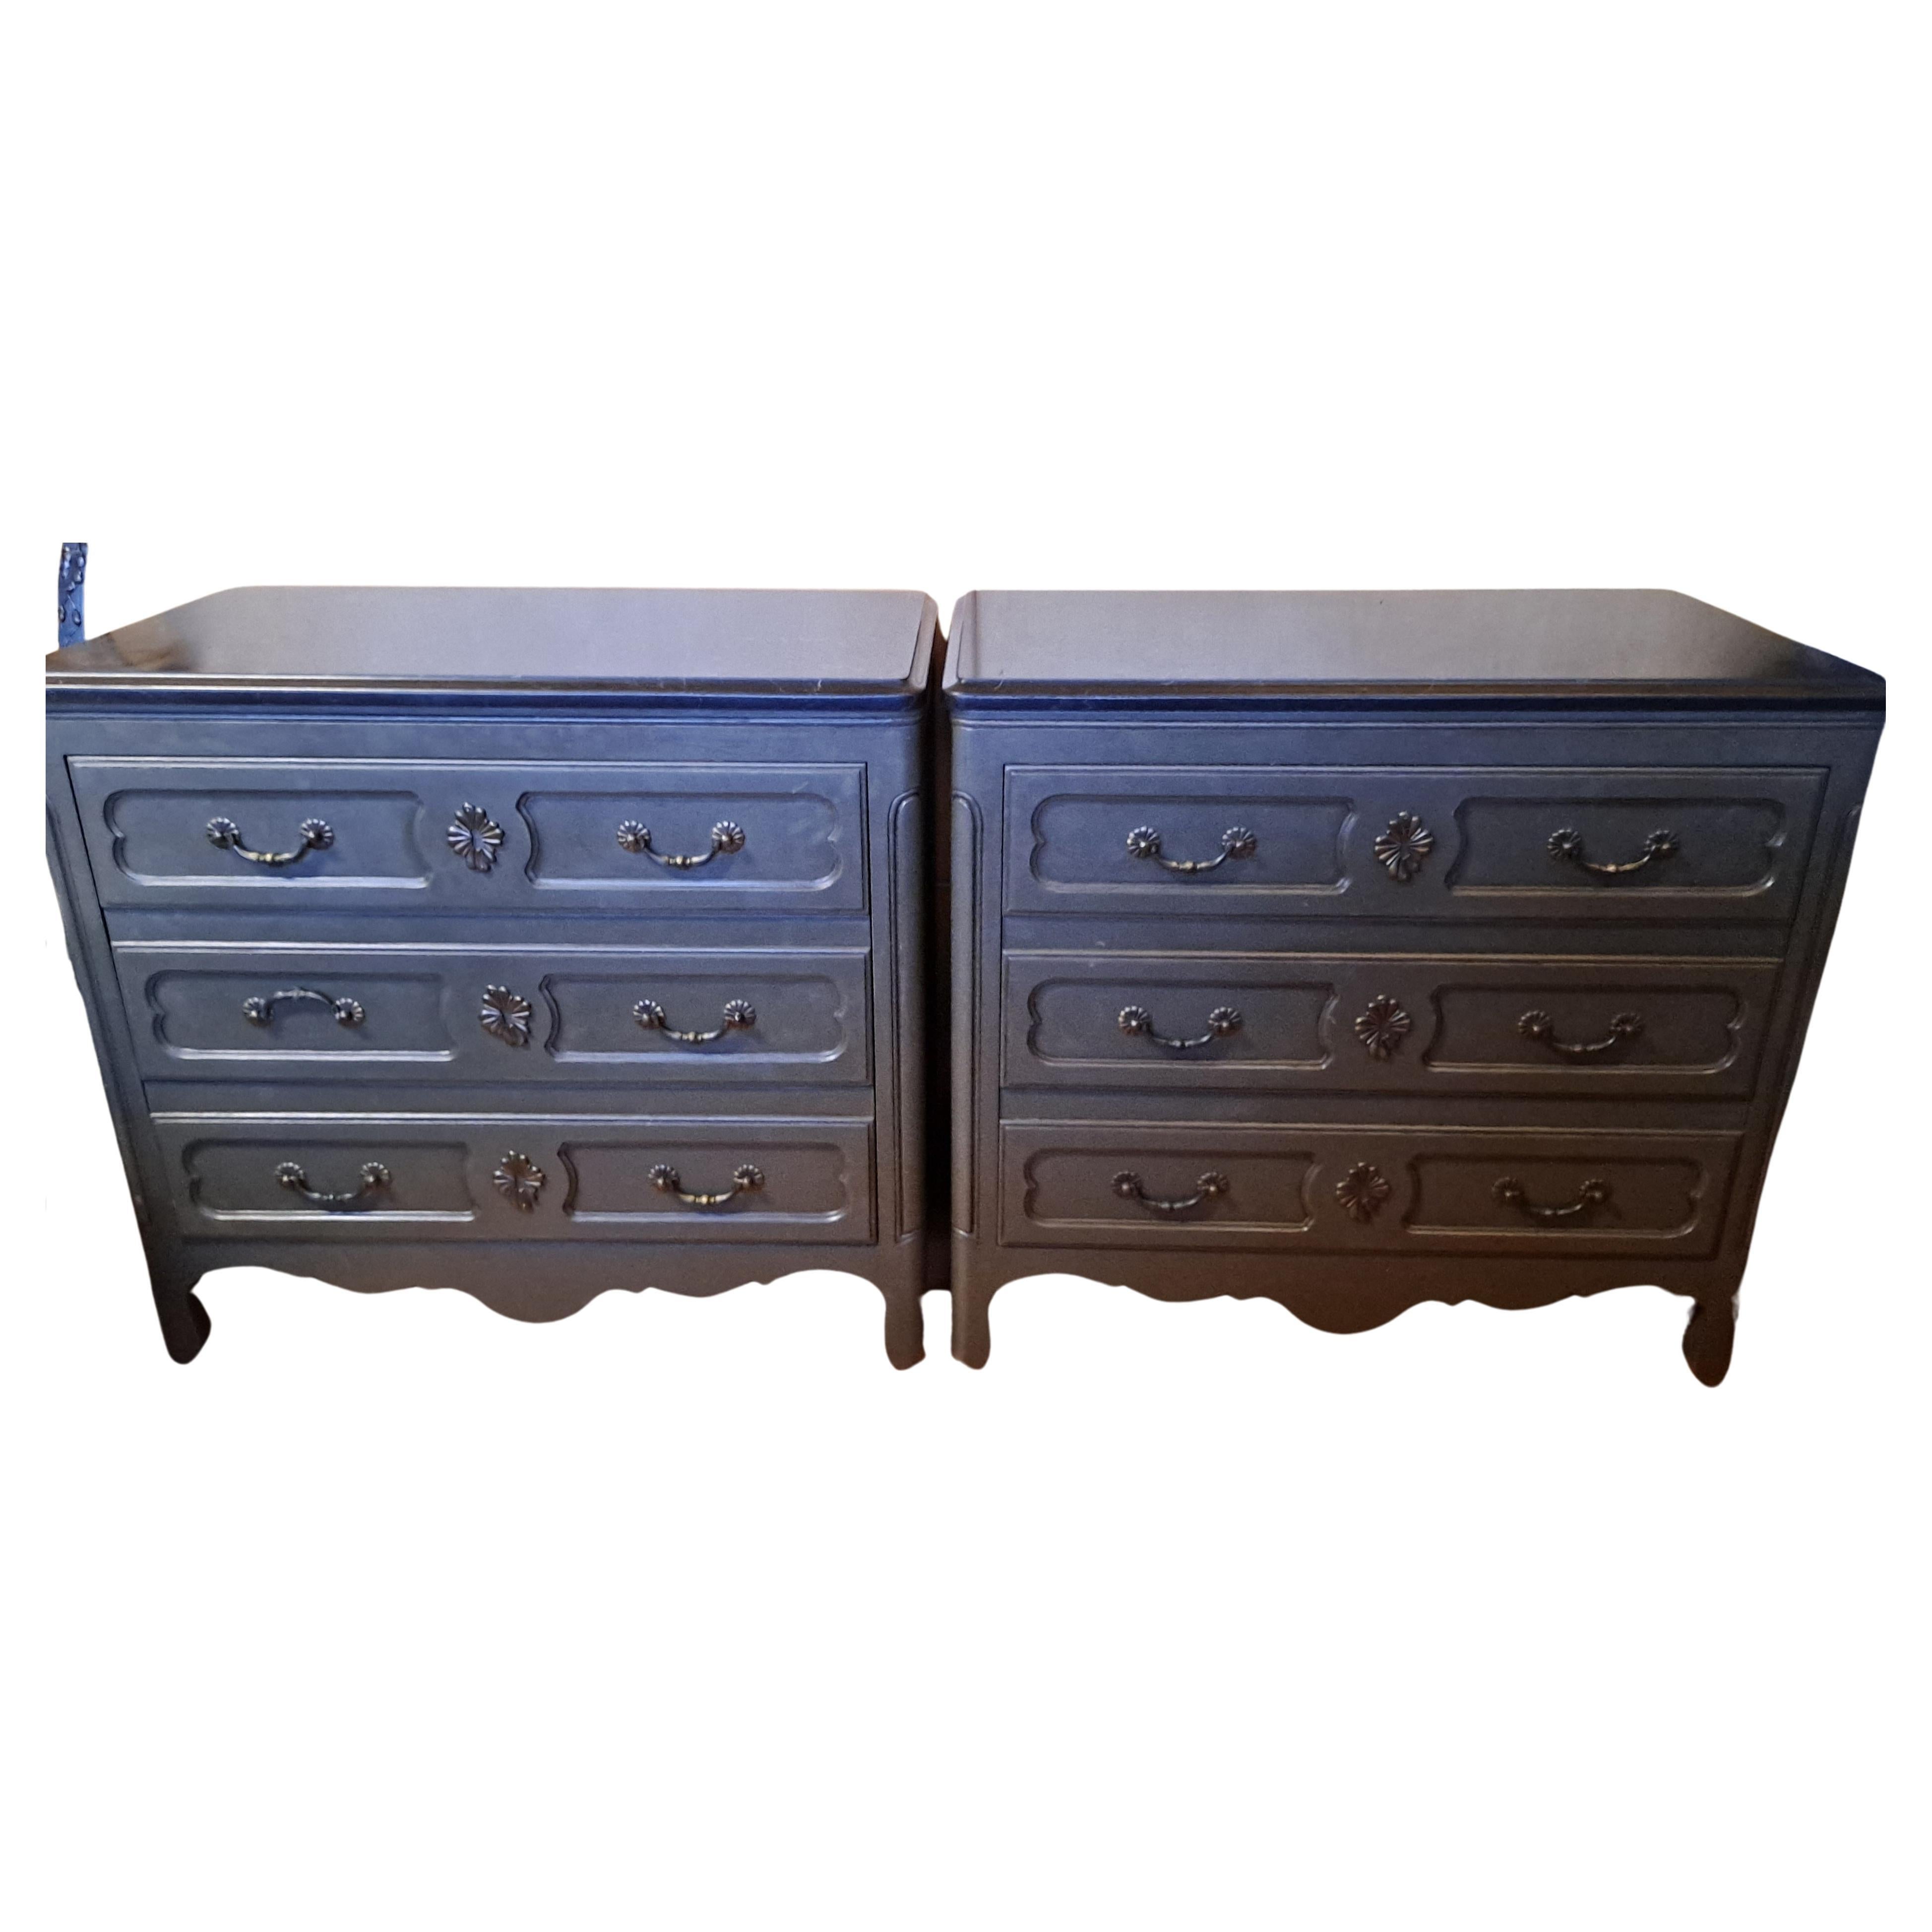 Pair of Widdicomb Dressers With Black Marble Tops